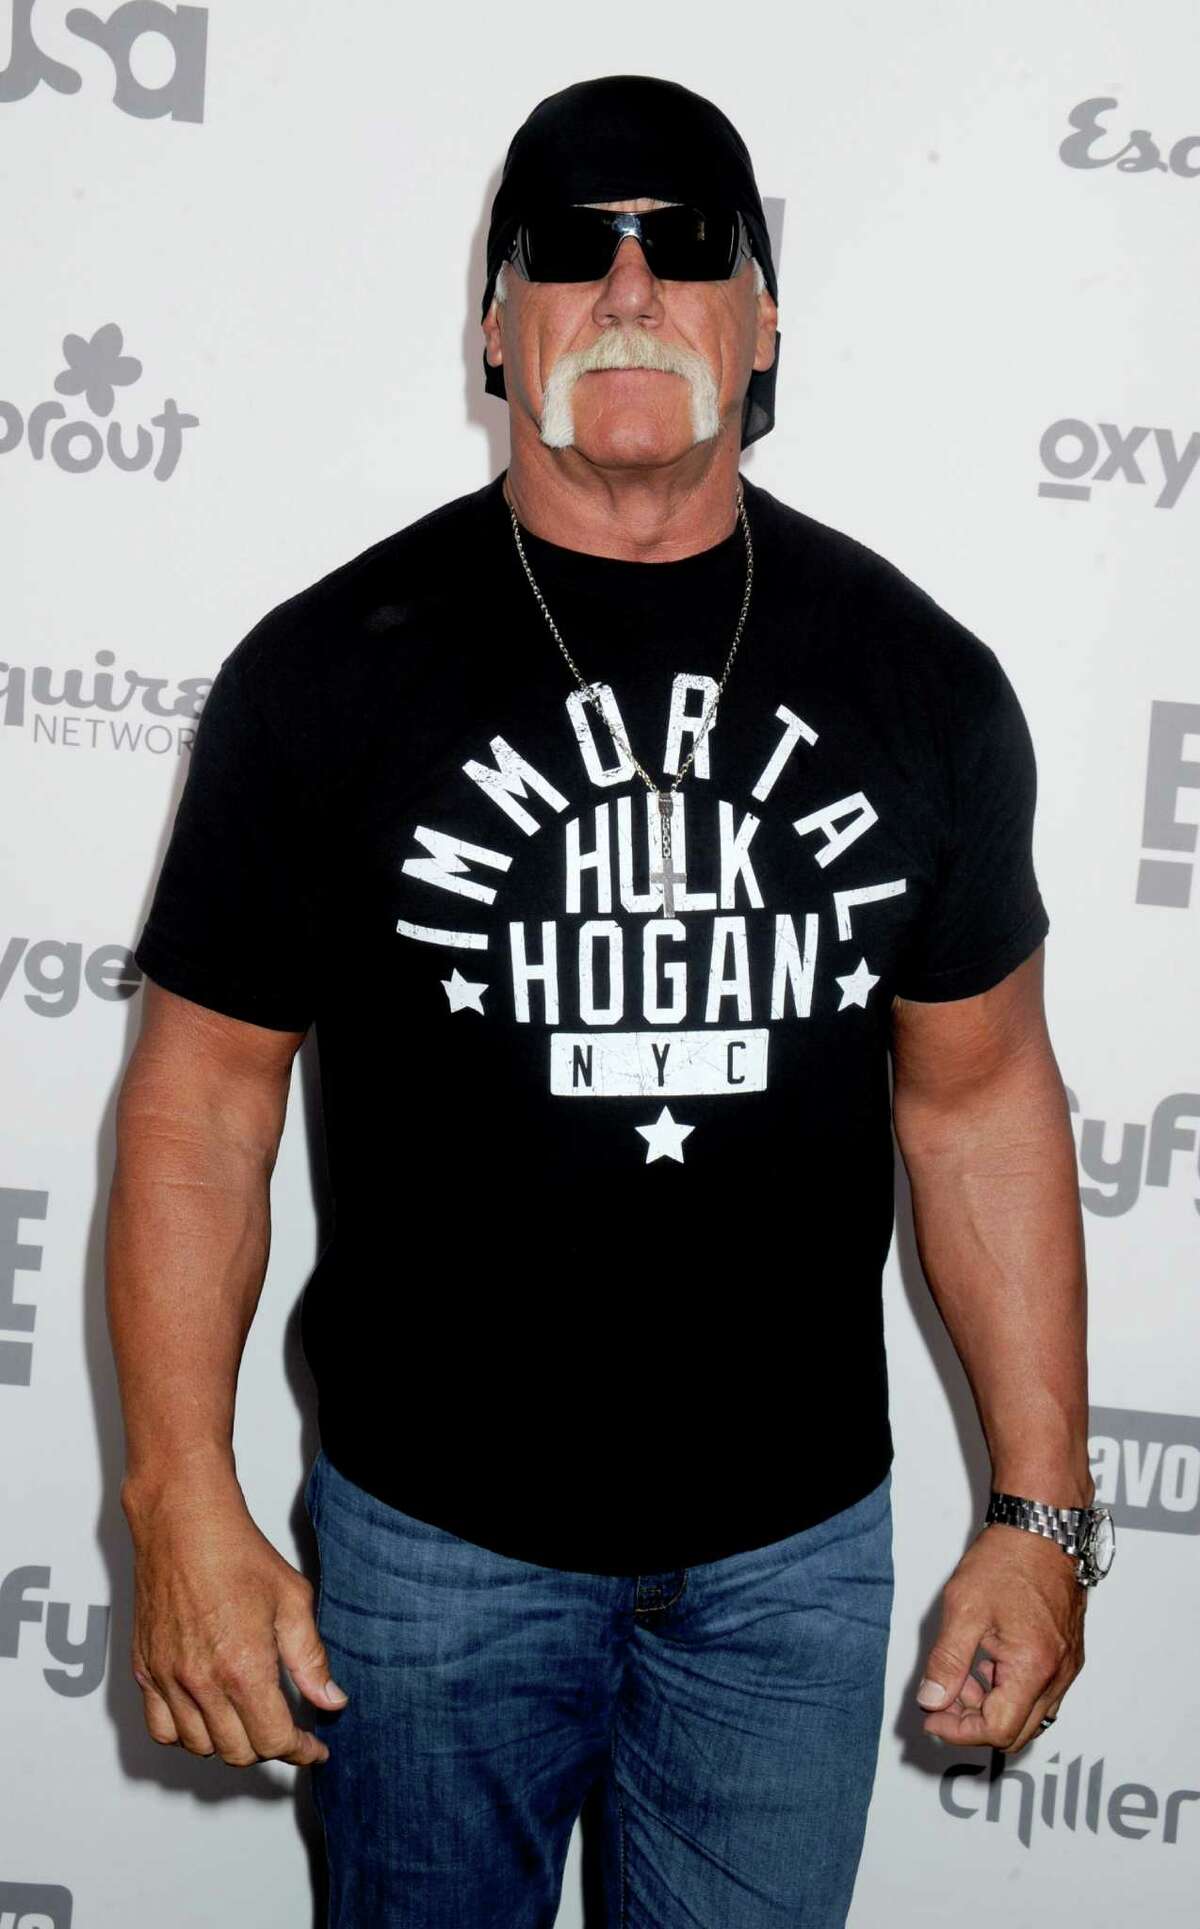 Hulk Hogan apologized for using "offensive language" in the controversial video. Entertainment Group Upfront at the Jacob K. Javits Convention Center in New York City on May 14, 2015. World Wrestling Entertainment fired Hogan Friday over racial slurs he made during a conversation he had with someone about Hogan's daughter, Brooke. (Dennis Van Tine/Abaca Press/TNS)